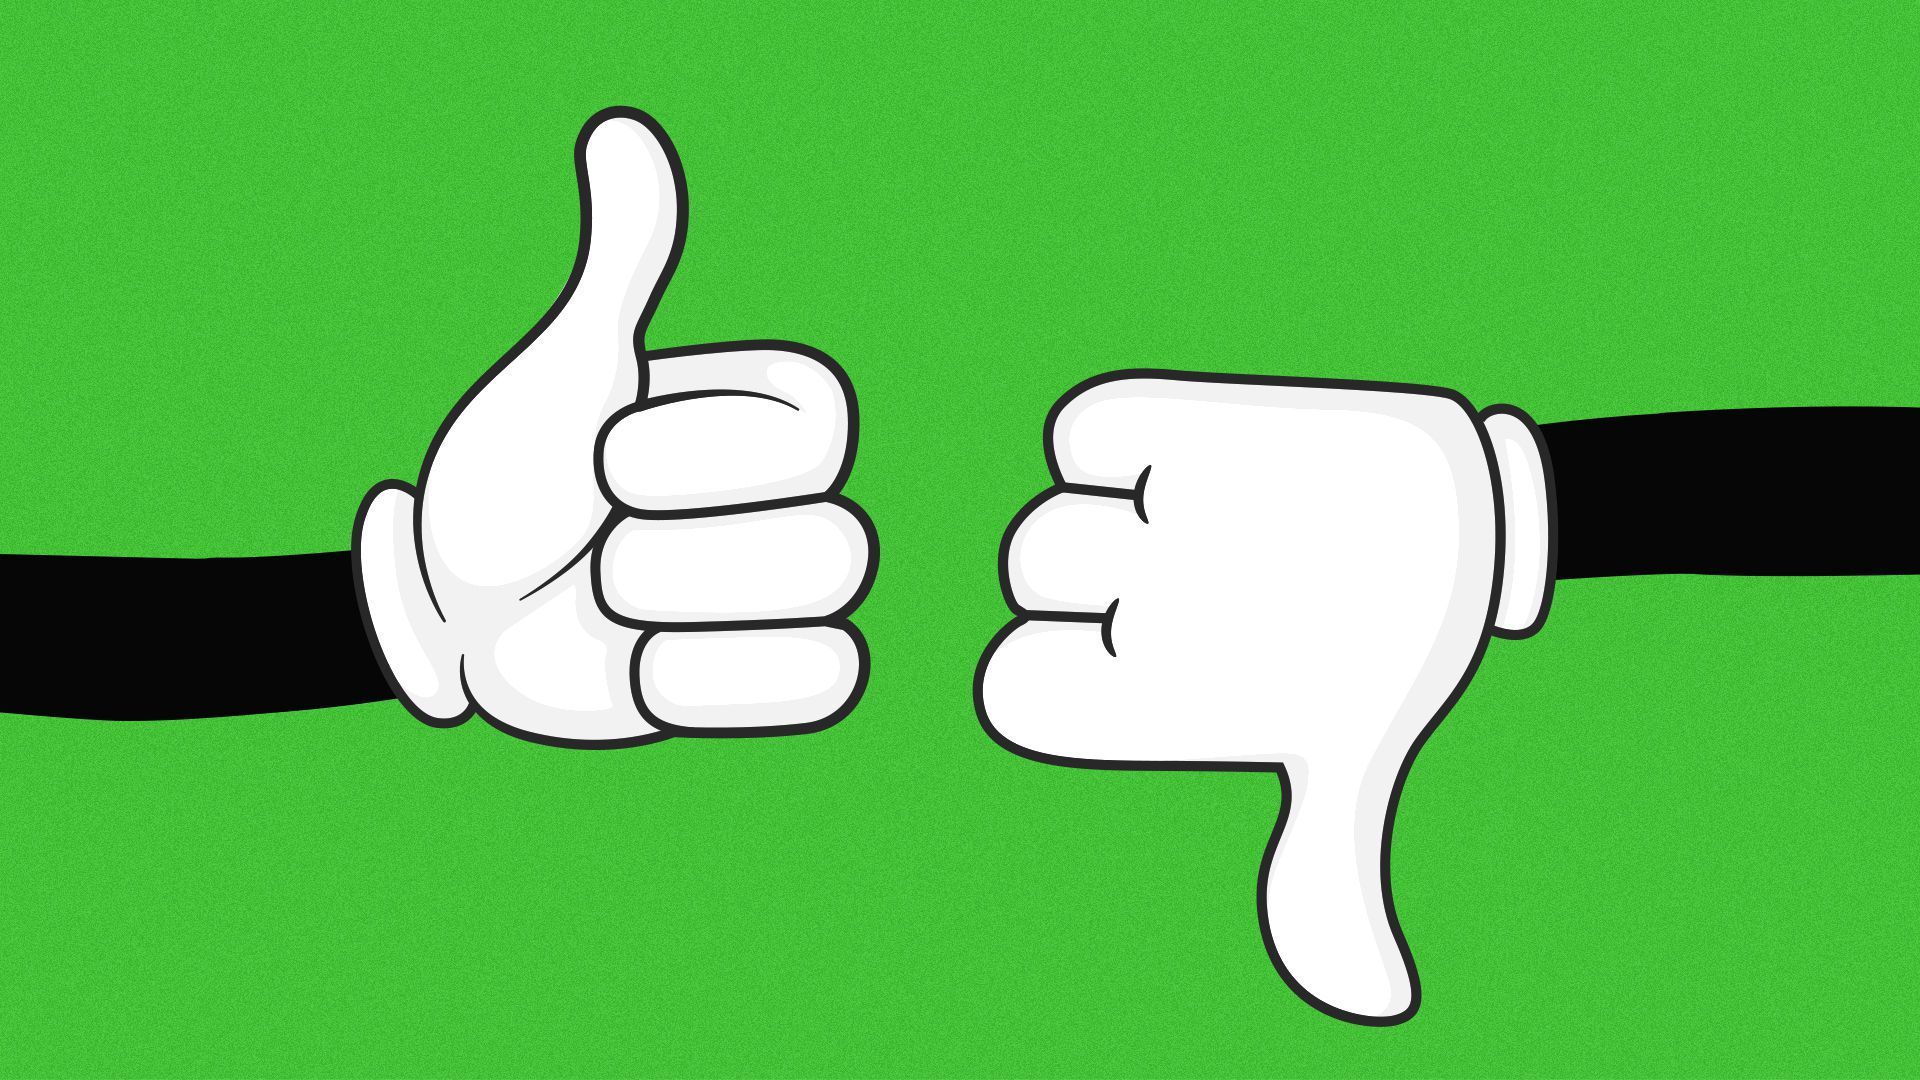 Illustration of two cartoon hands: one making a thumbs-up, the other making a thumbs-down.